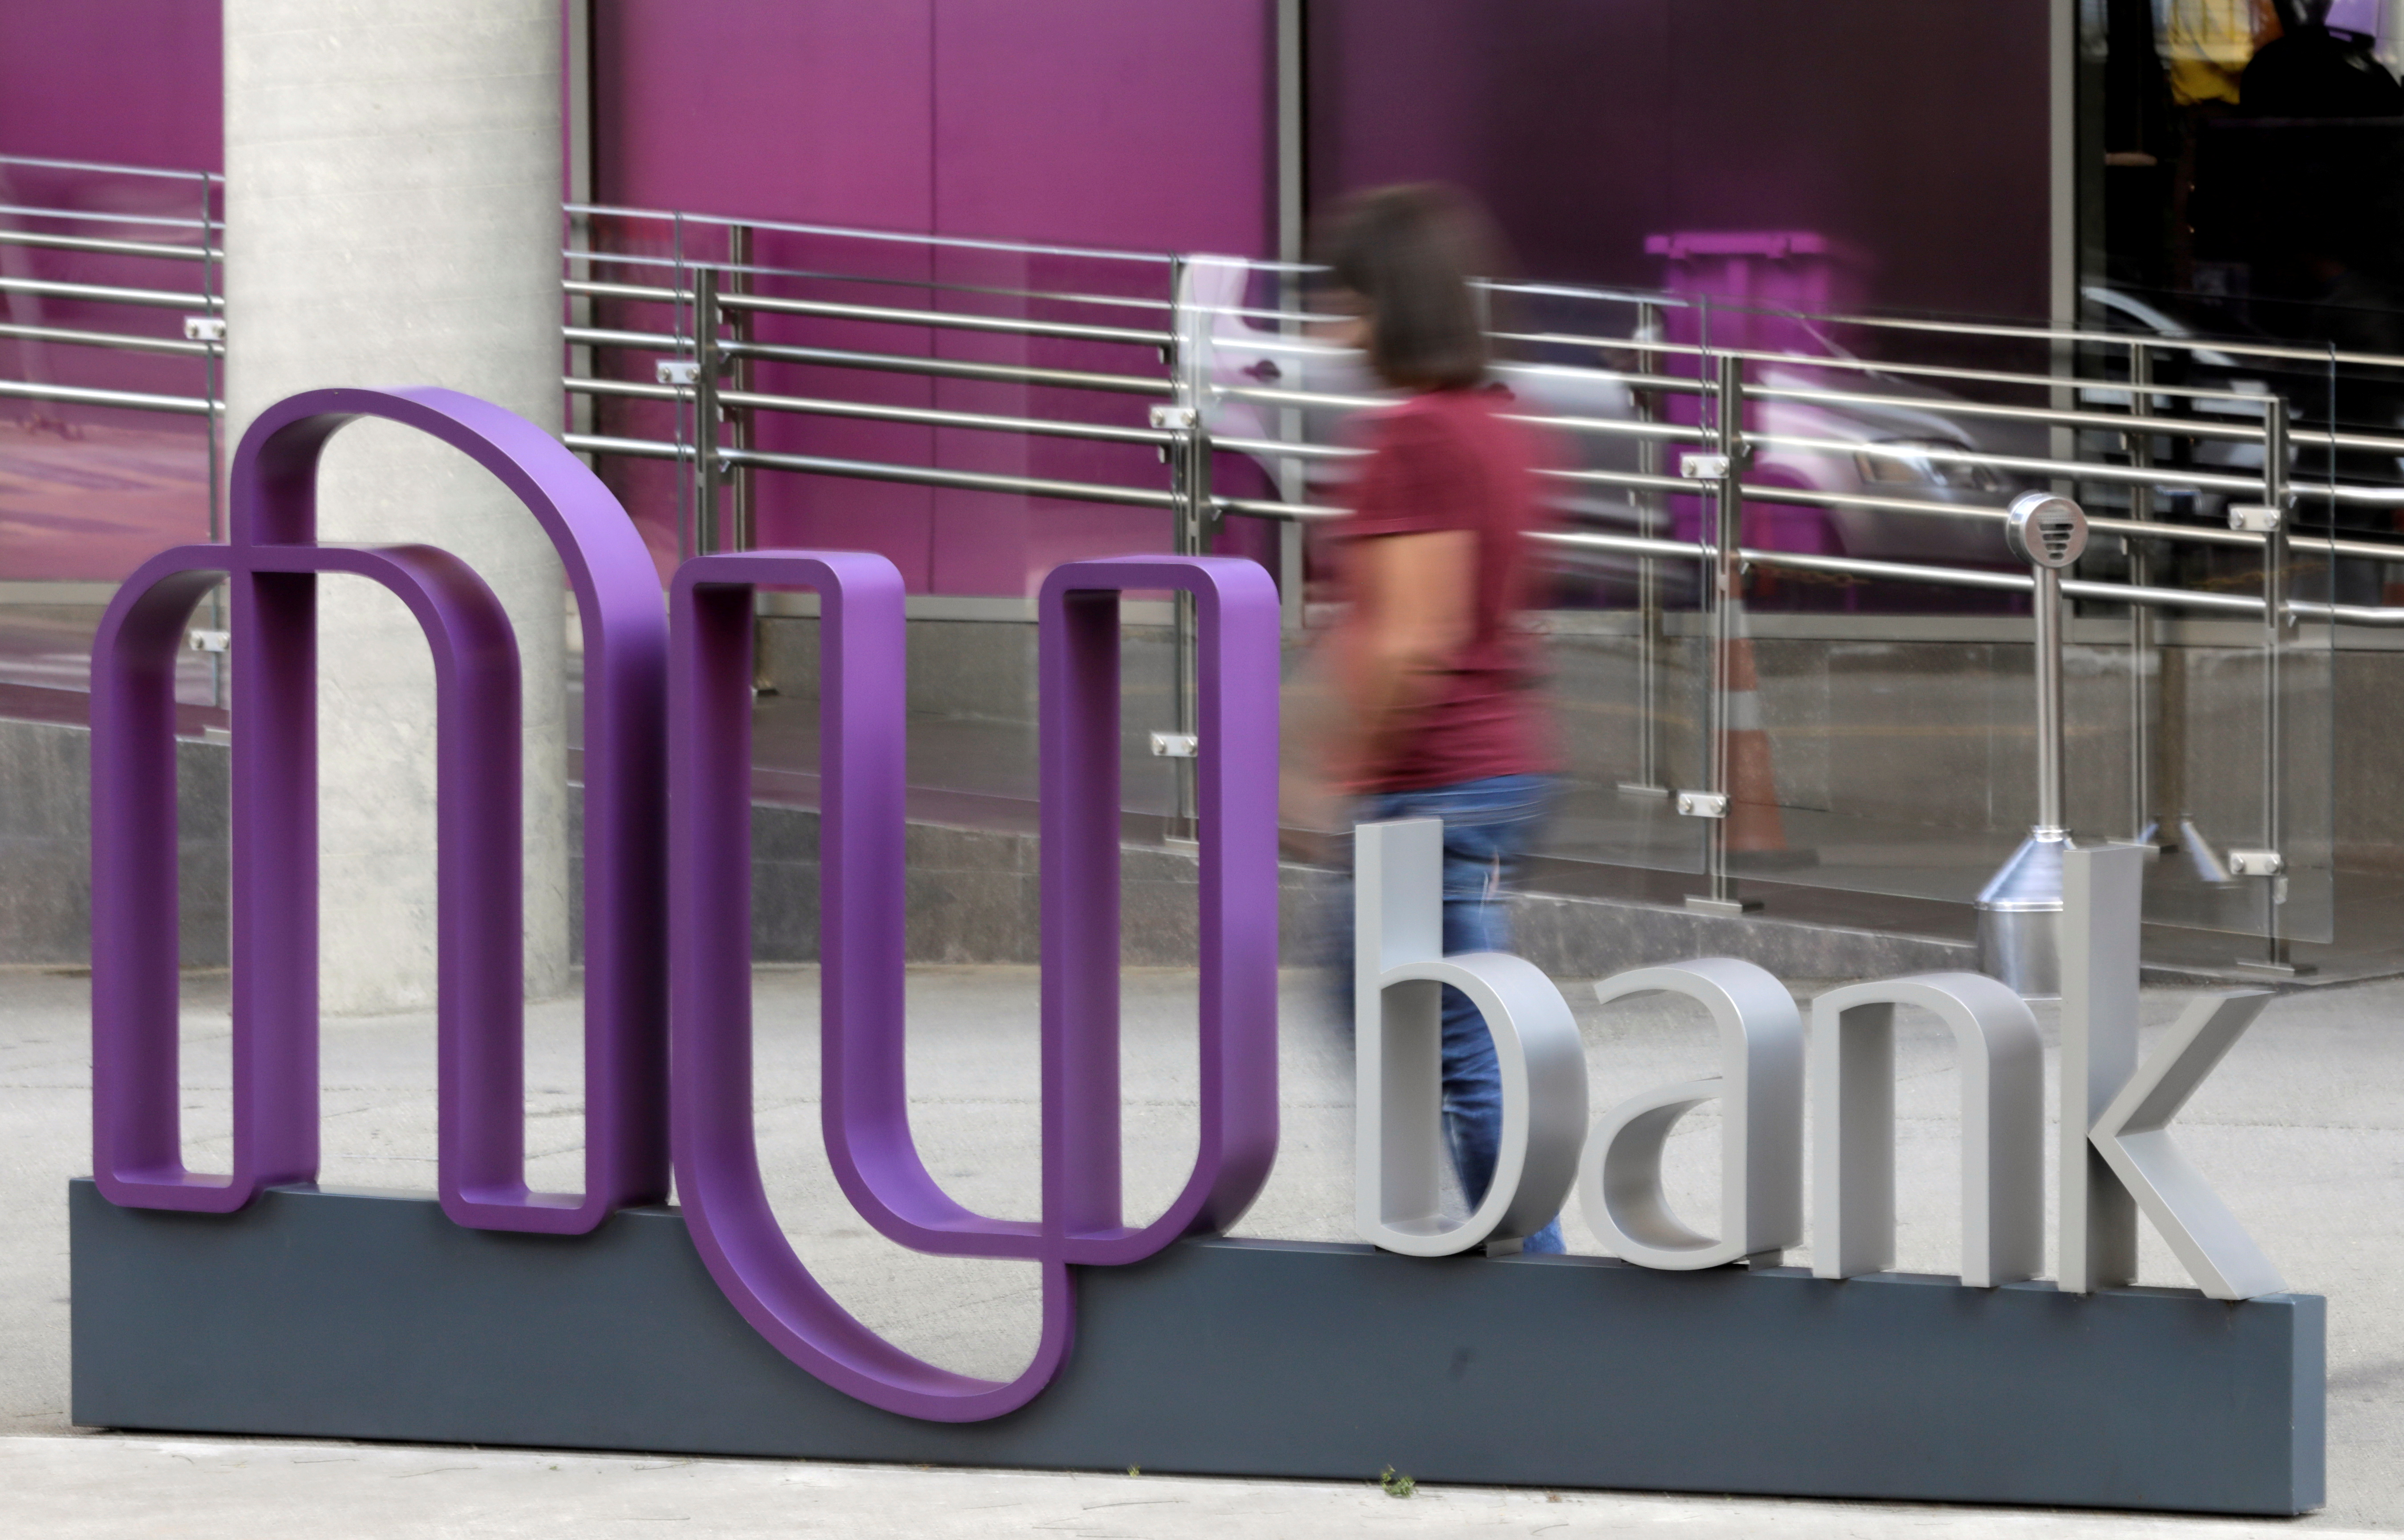 The logo of Nubank, a Brazilian fintech startup, is pictured at the bank's headquarters in Sao Paulo, Brazil June 19, 2018. REUTERS/Paulo Whitaker